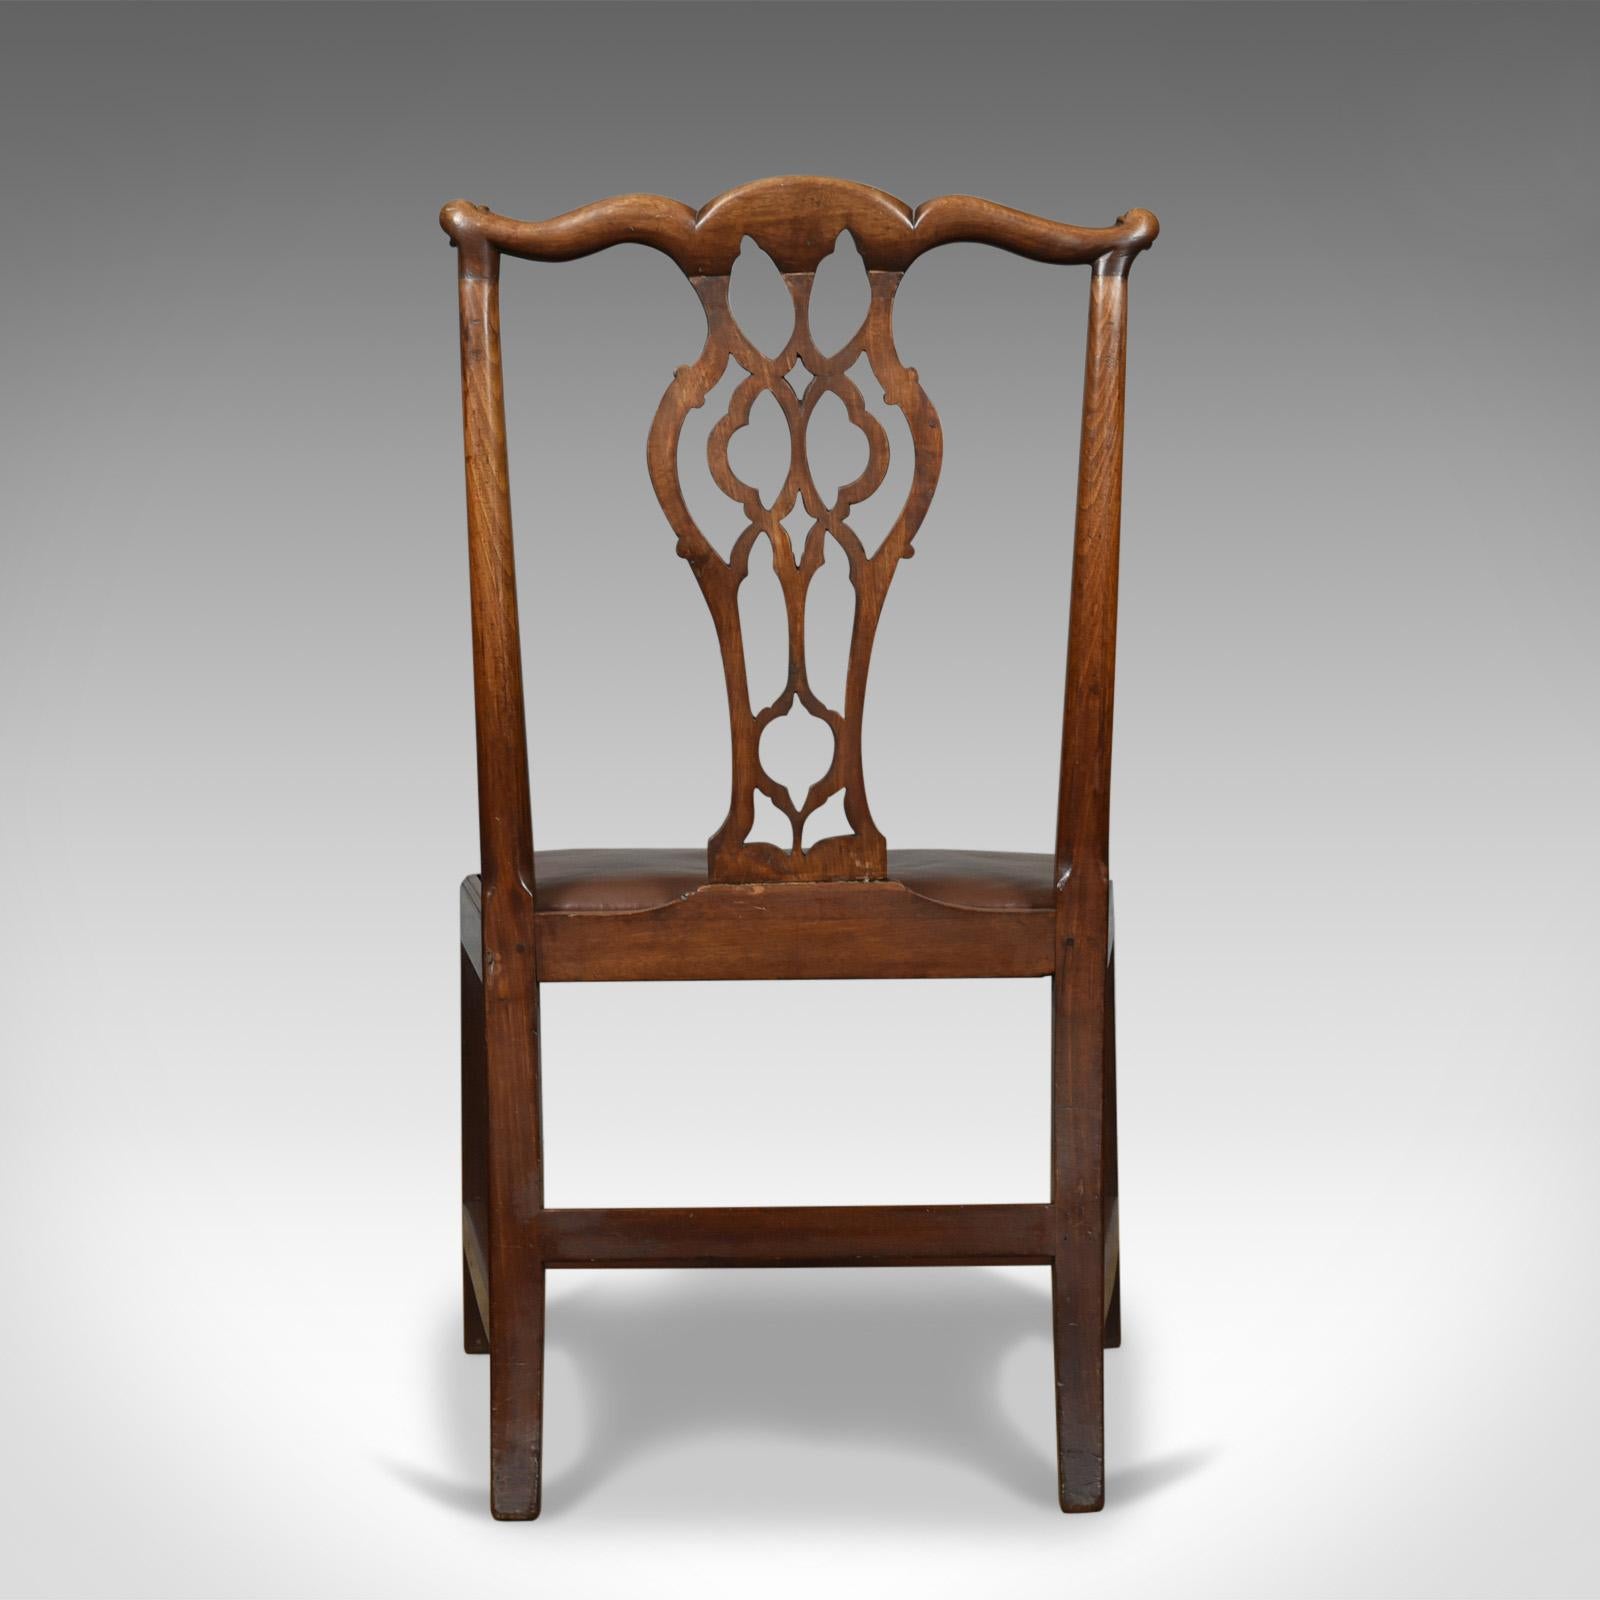 19th Century Set of Six Antique Dining Chairs, Mahogany, English, Georgian, Chippendale